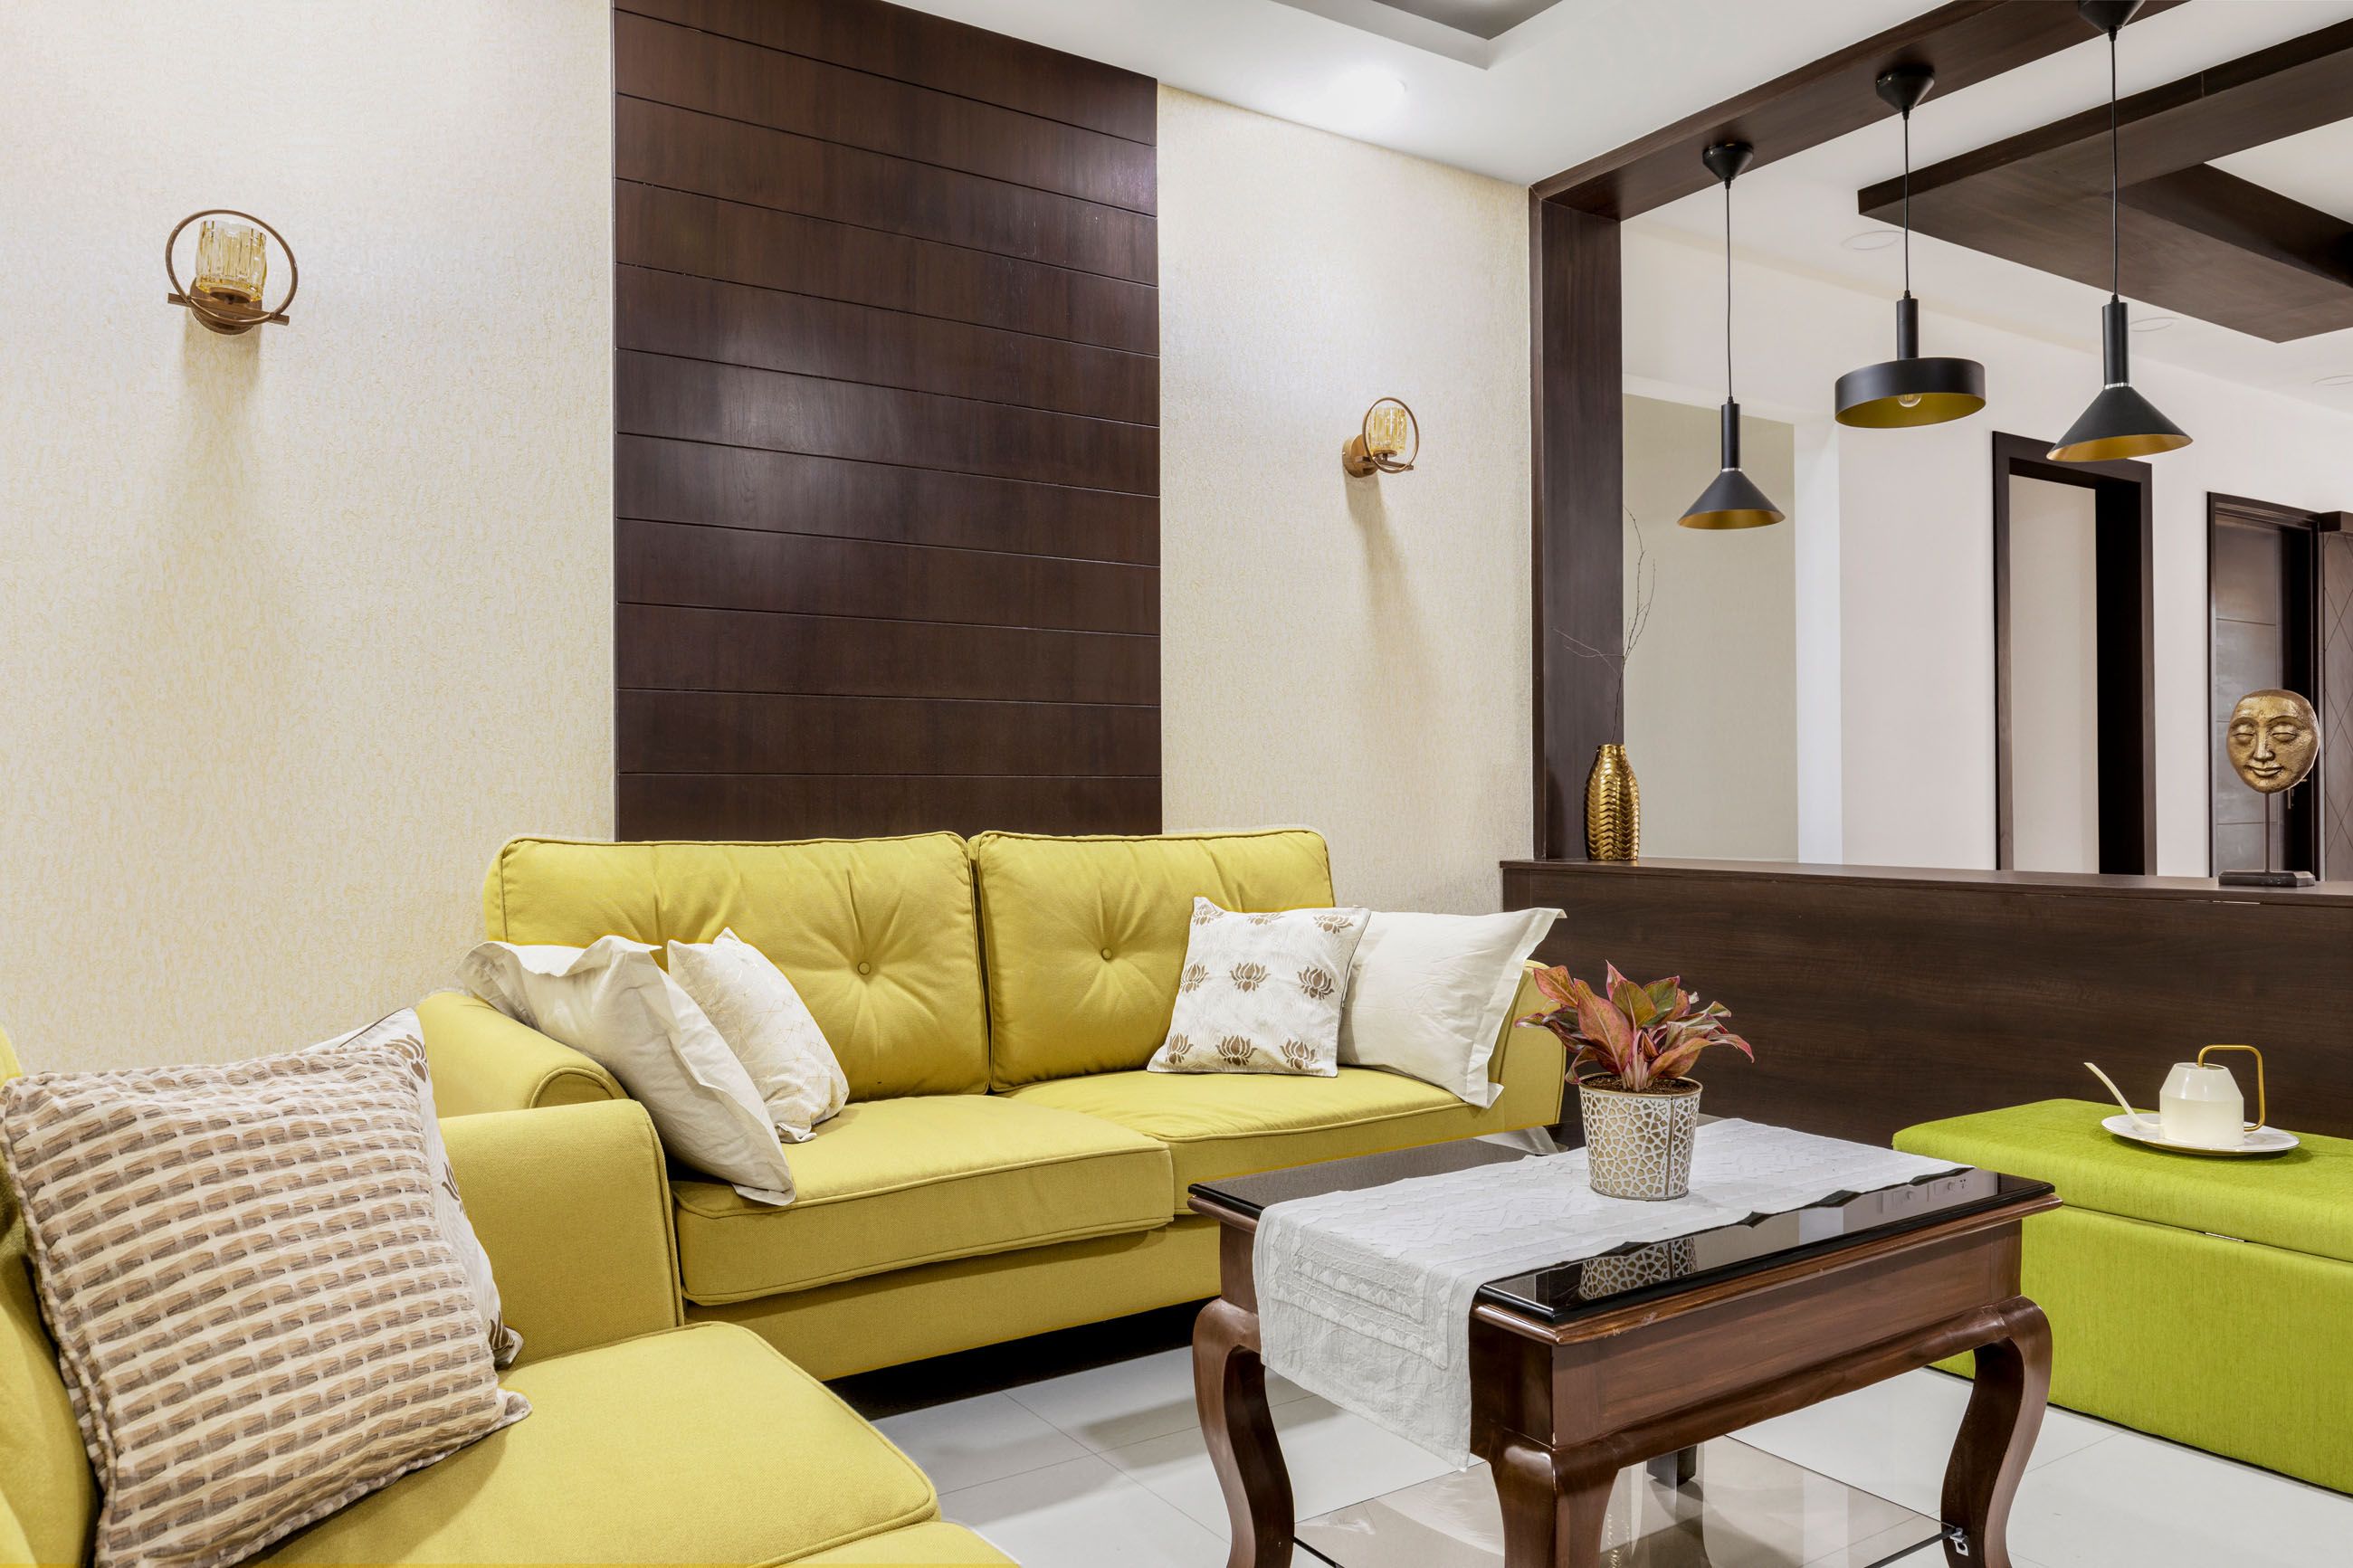 Contemporary Hyderabad 3-BHK Interior Design With Wood And White TV Cabinet